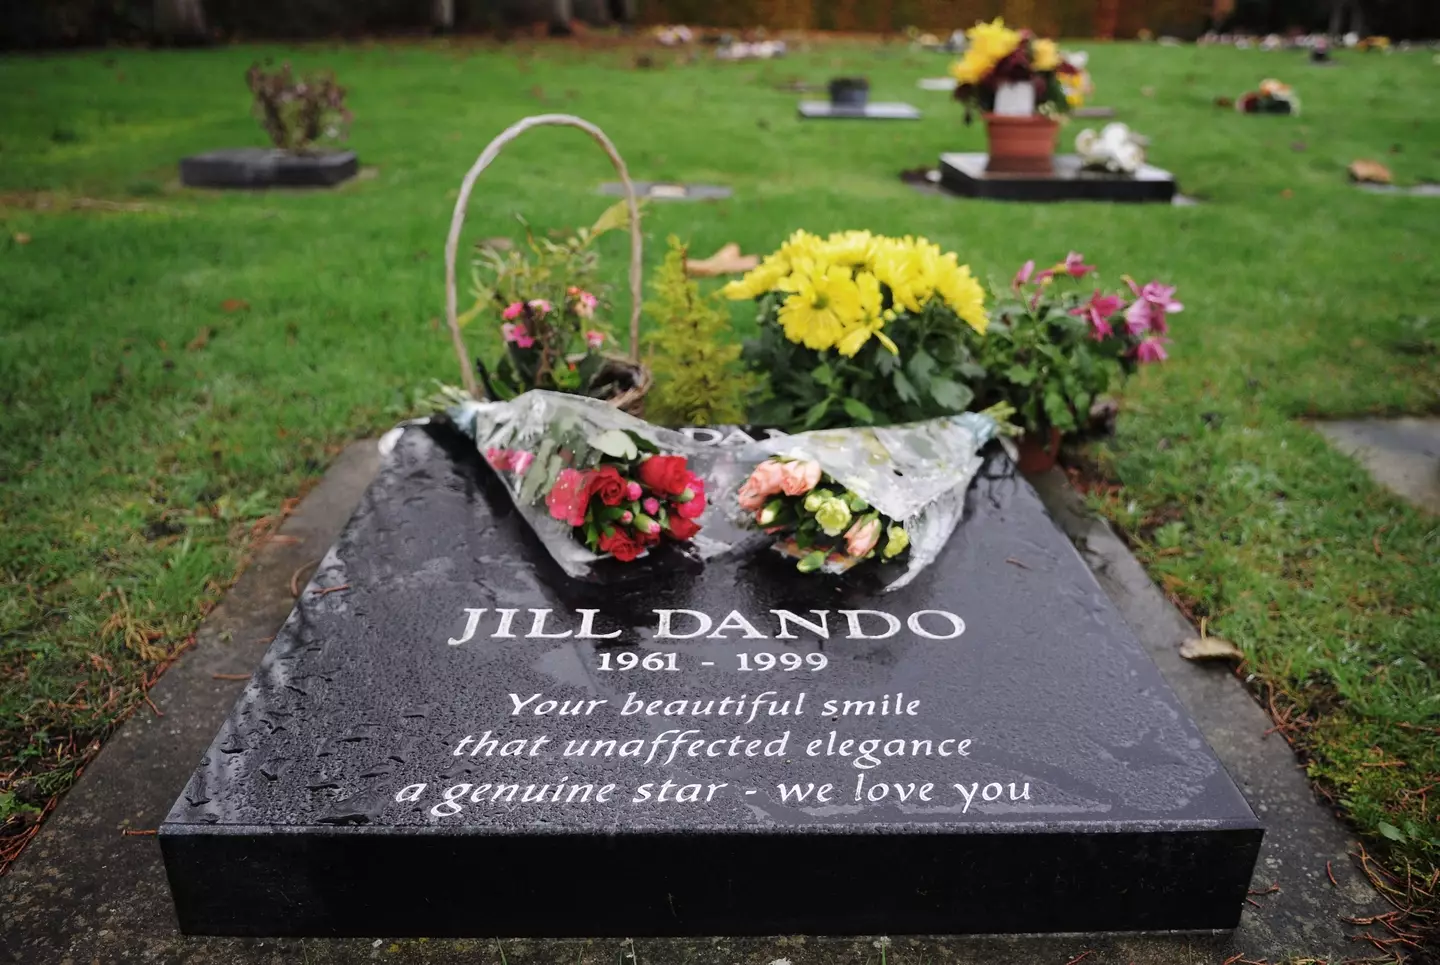 Jill's murder remains unsolved. (Jim Dyson/Getty Images)